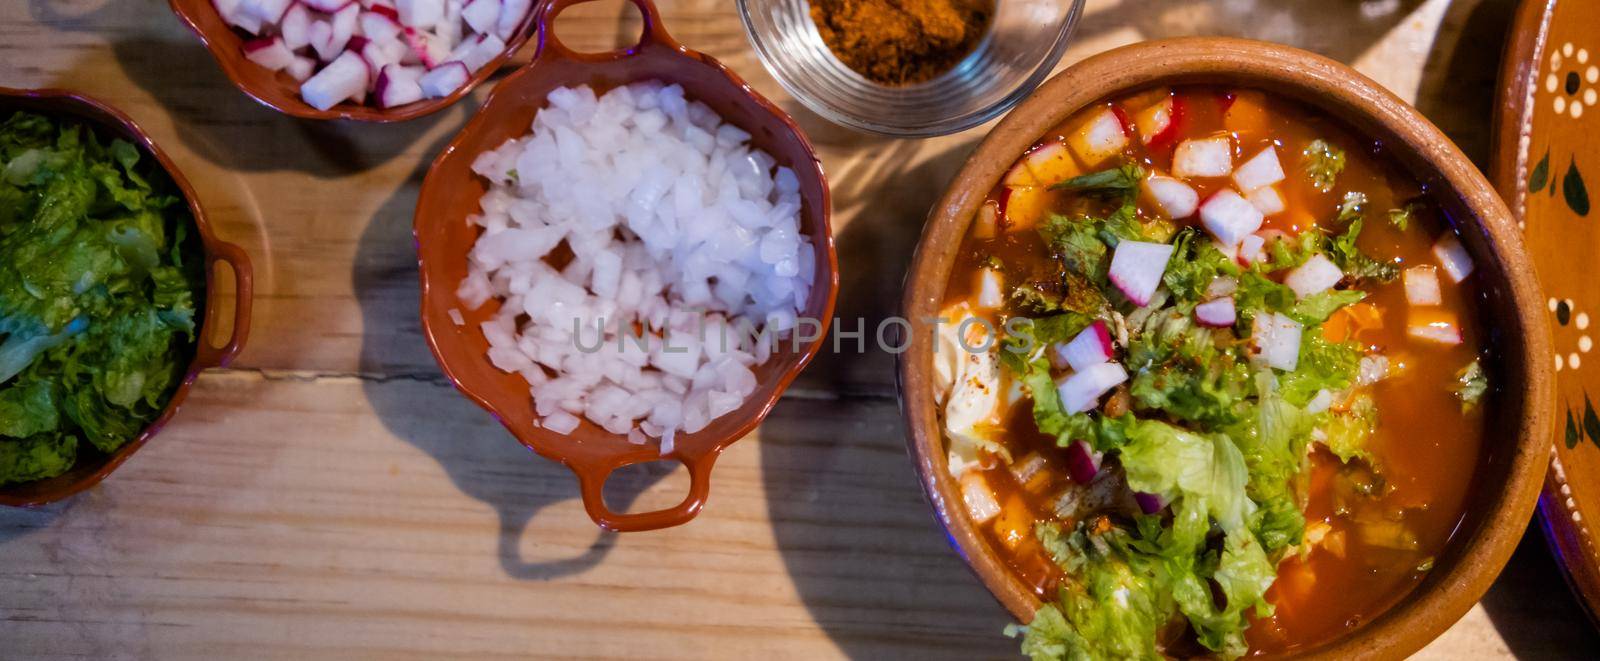 Delicious traditional Mexican pozole, tostadas, and condiments on wooden table by Kanelbulle